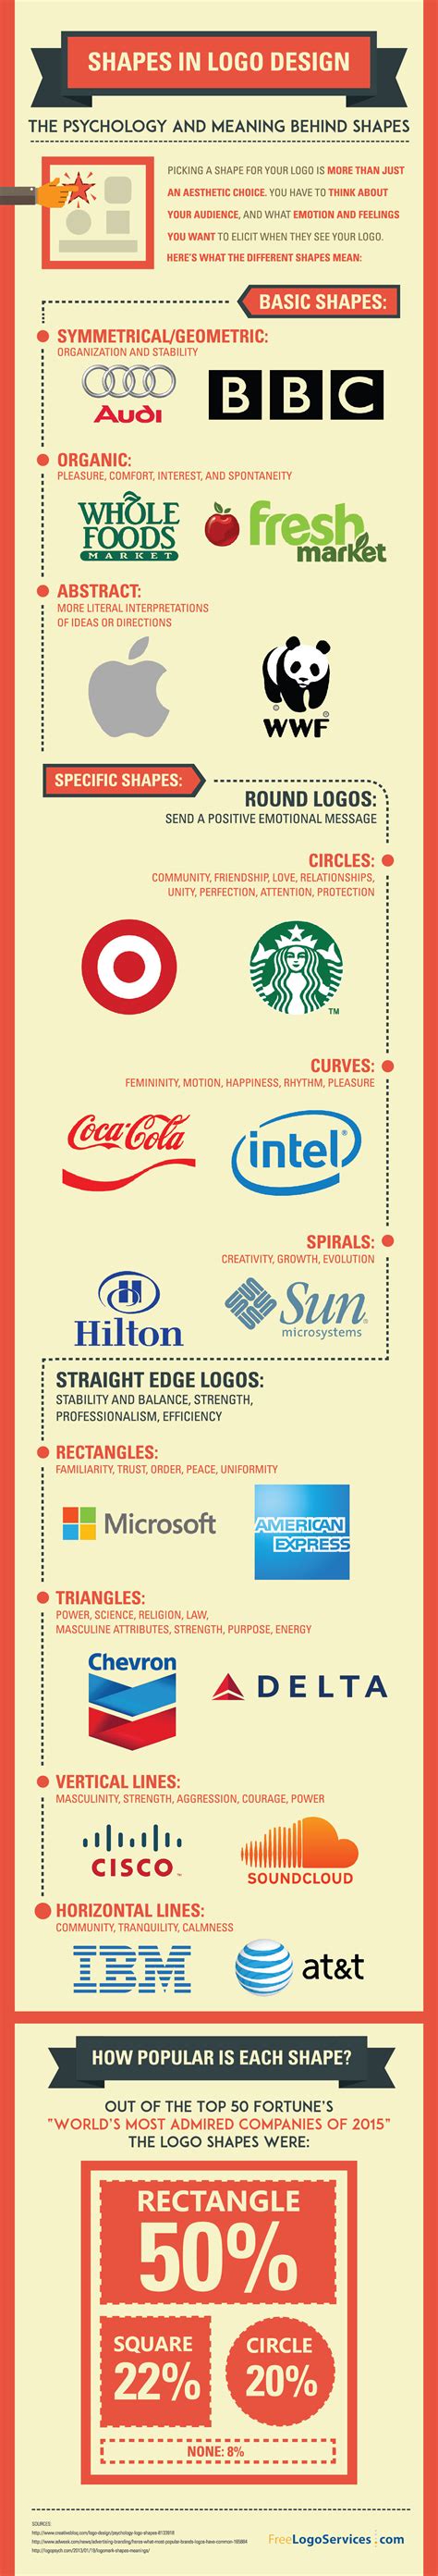 The Psychology And Meaning Of Shapes In Logo Design Infographic Logo